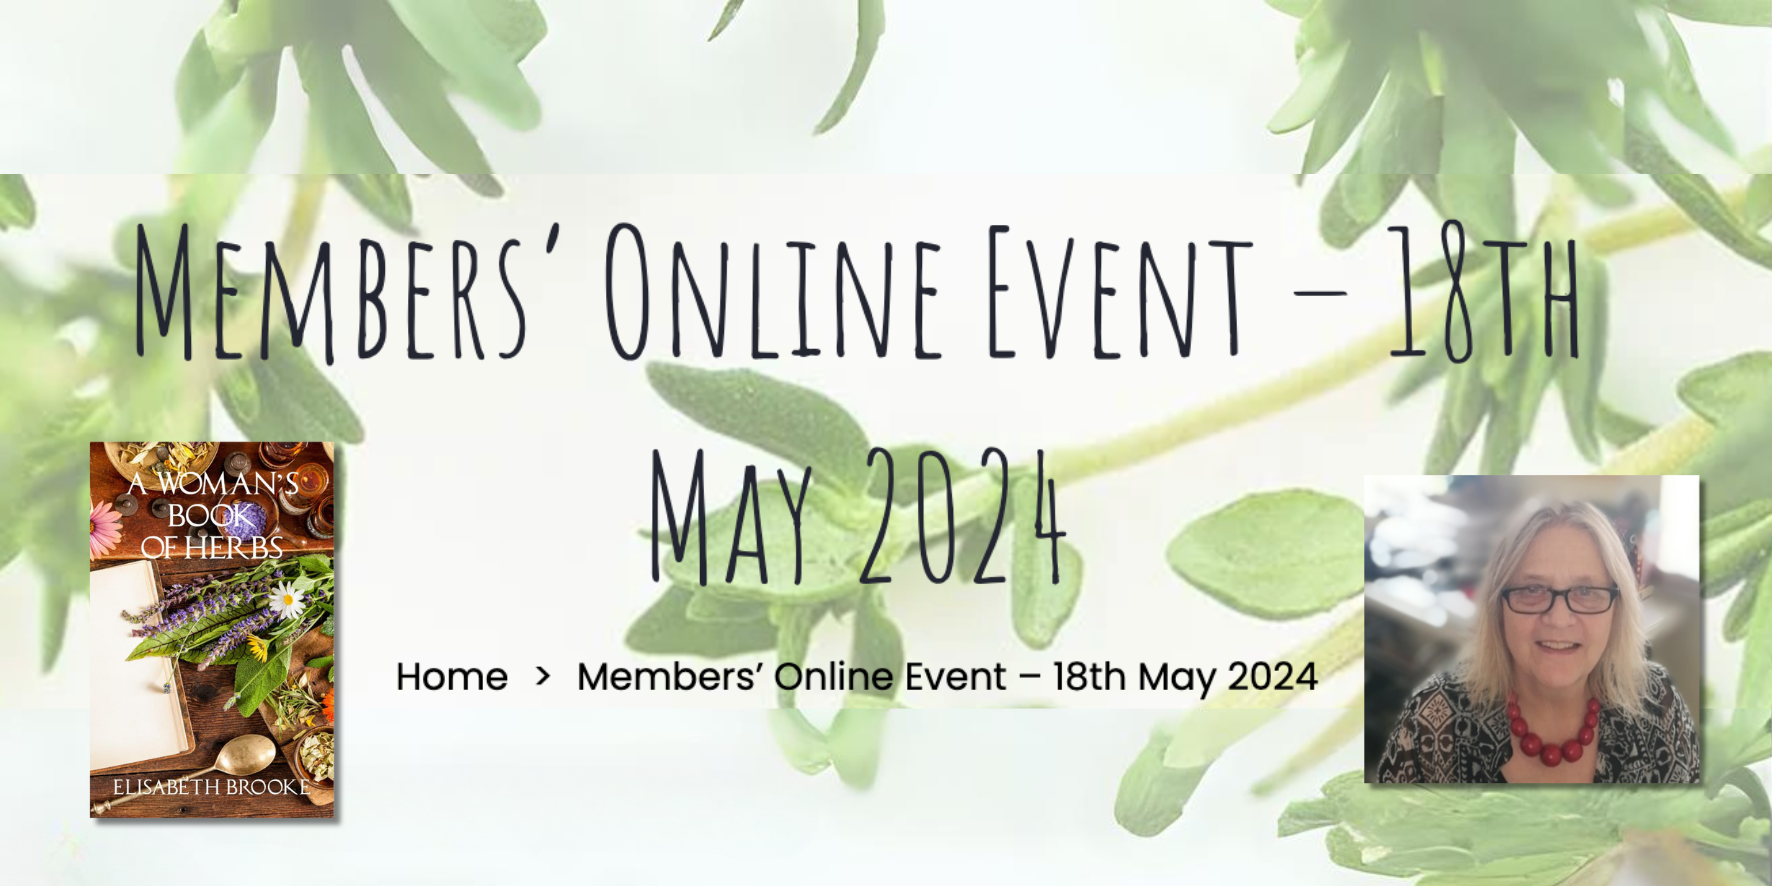 The Herb Society Online Event with Elisabeth Brooke